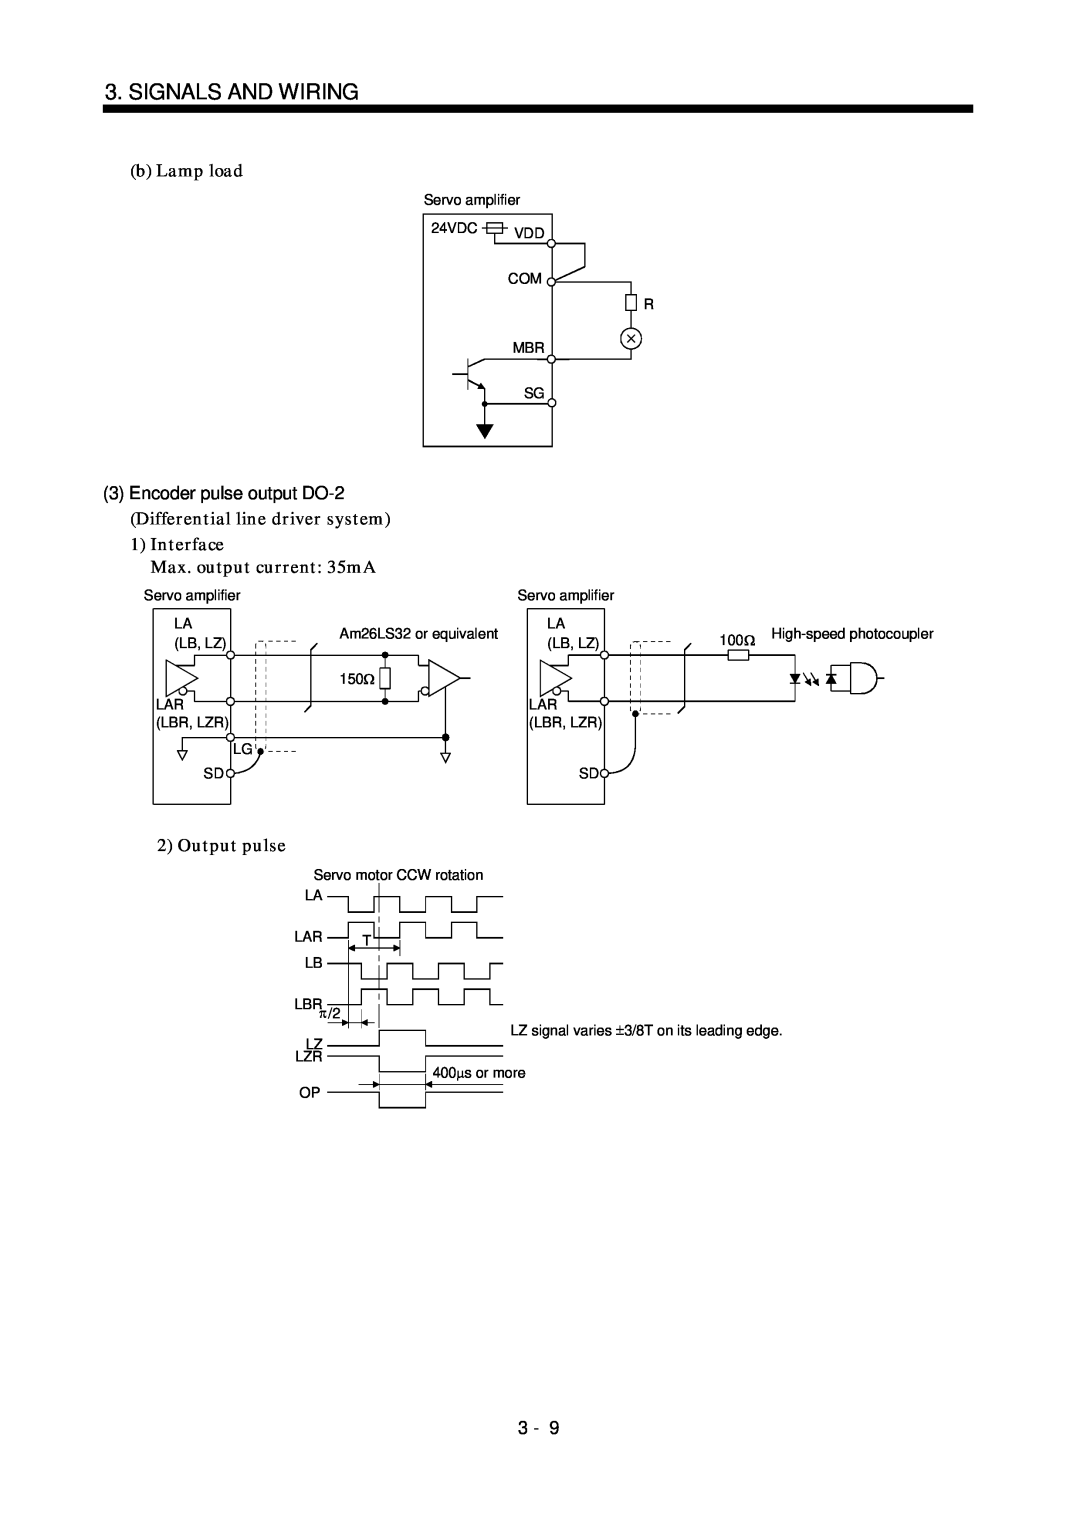 Bose MR-J2S- B 3Encoder pulse output DO-2, Signals And Wiring, bLamp load, Differential line driver system 1Interface 